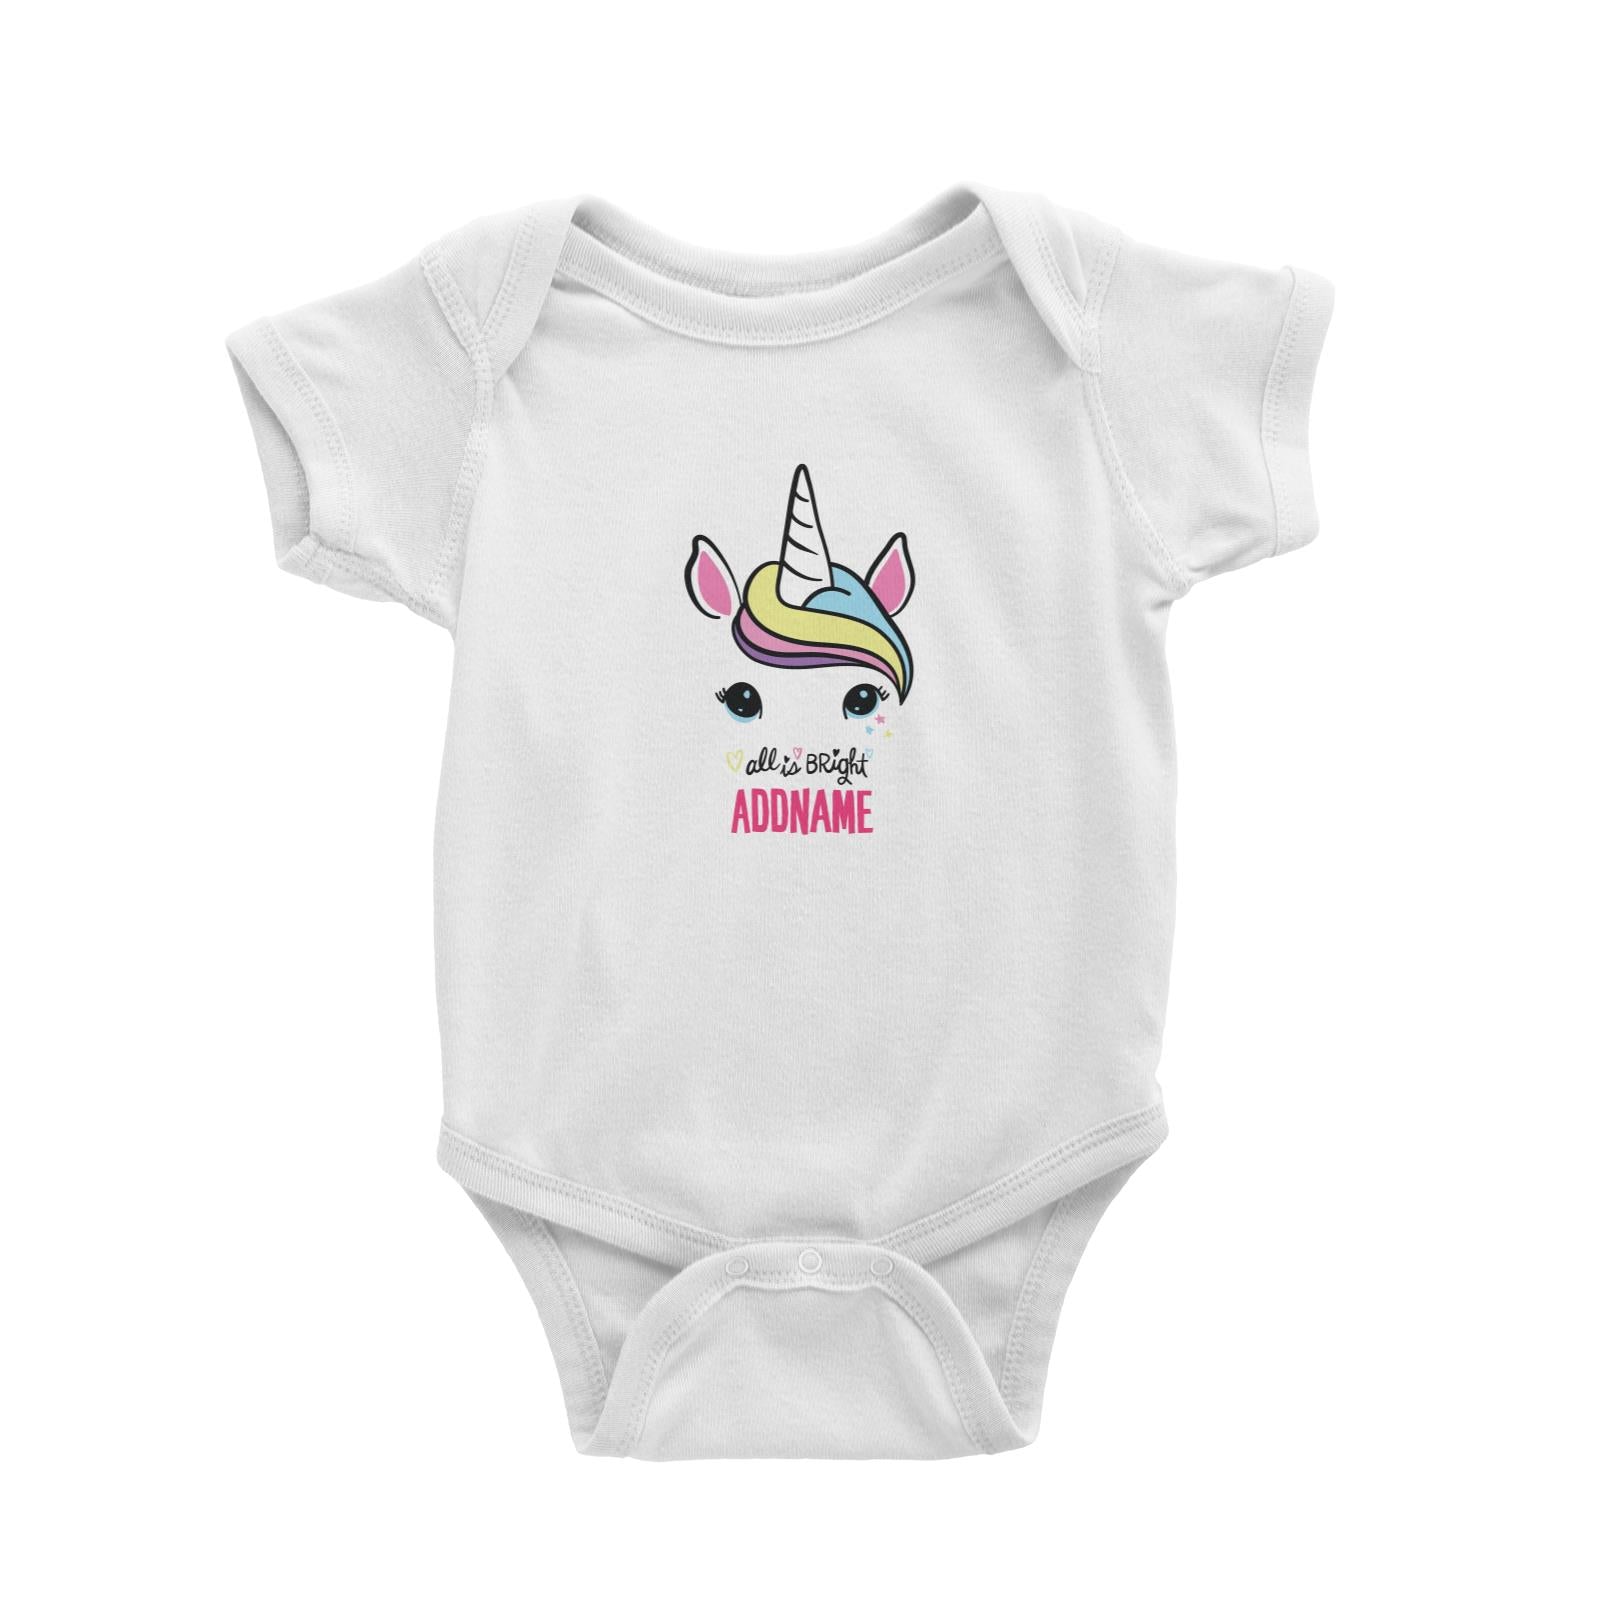 Cool Vibrant Series Unicorn Face All Is Bright Addname Baby Romper